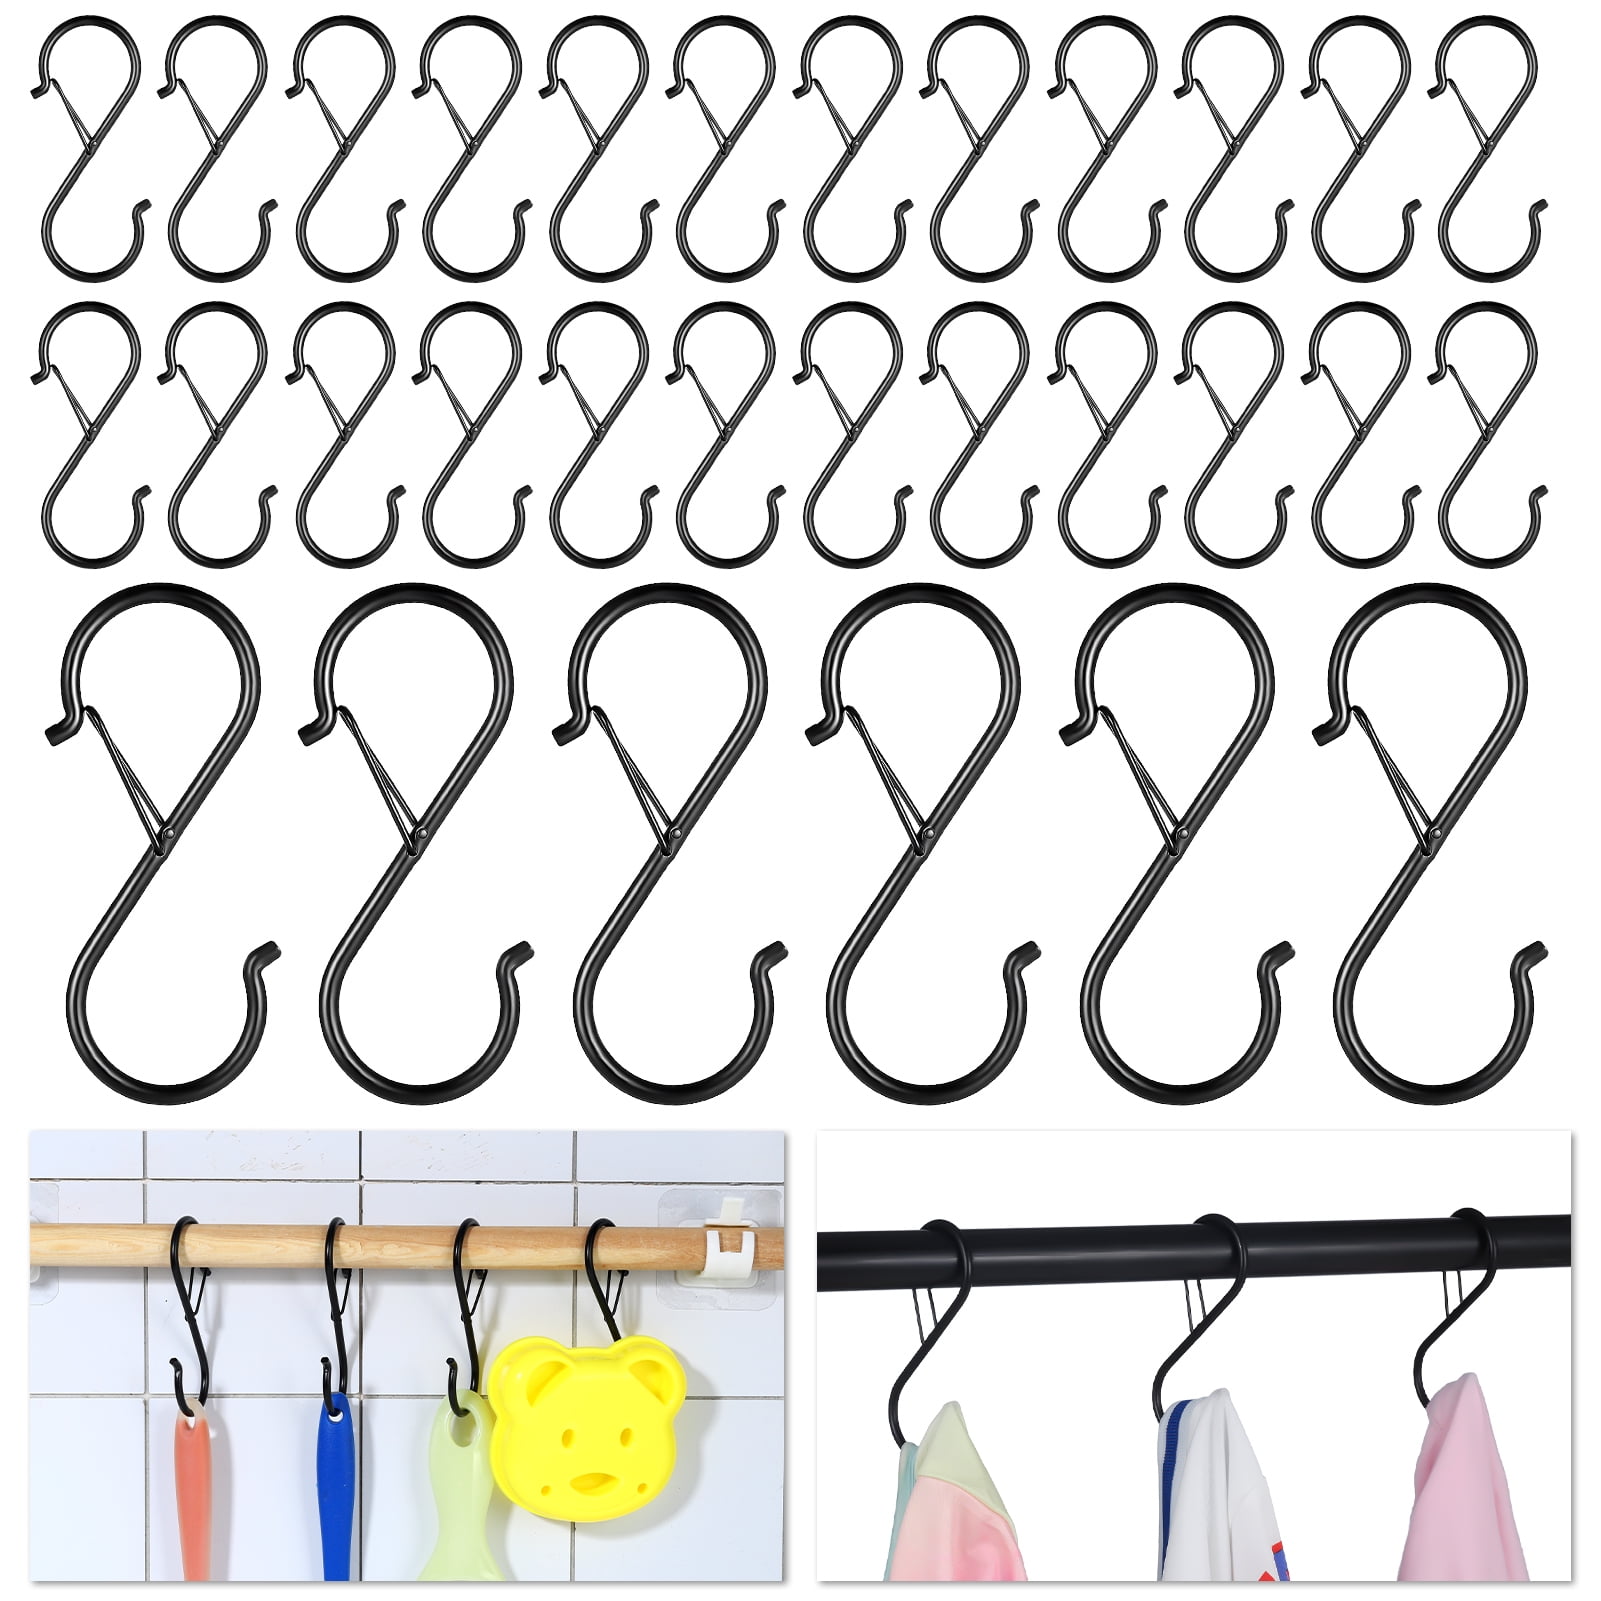 WQFSTORE 15Pcs S Hooks Metal Heavy Duty for Hanging Plants, Closet, Pots  and Pans, with Safety Buckle Design, Small, Black 